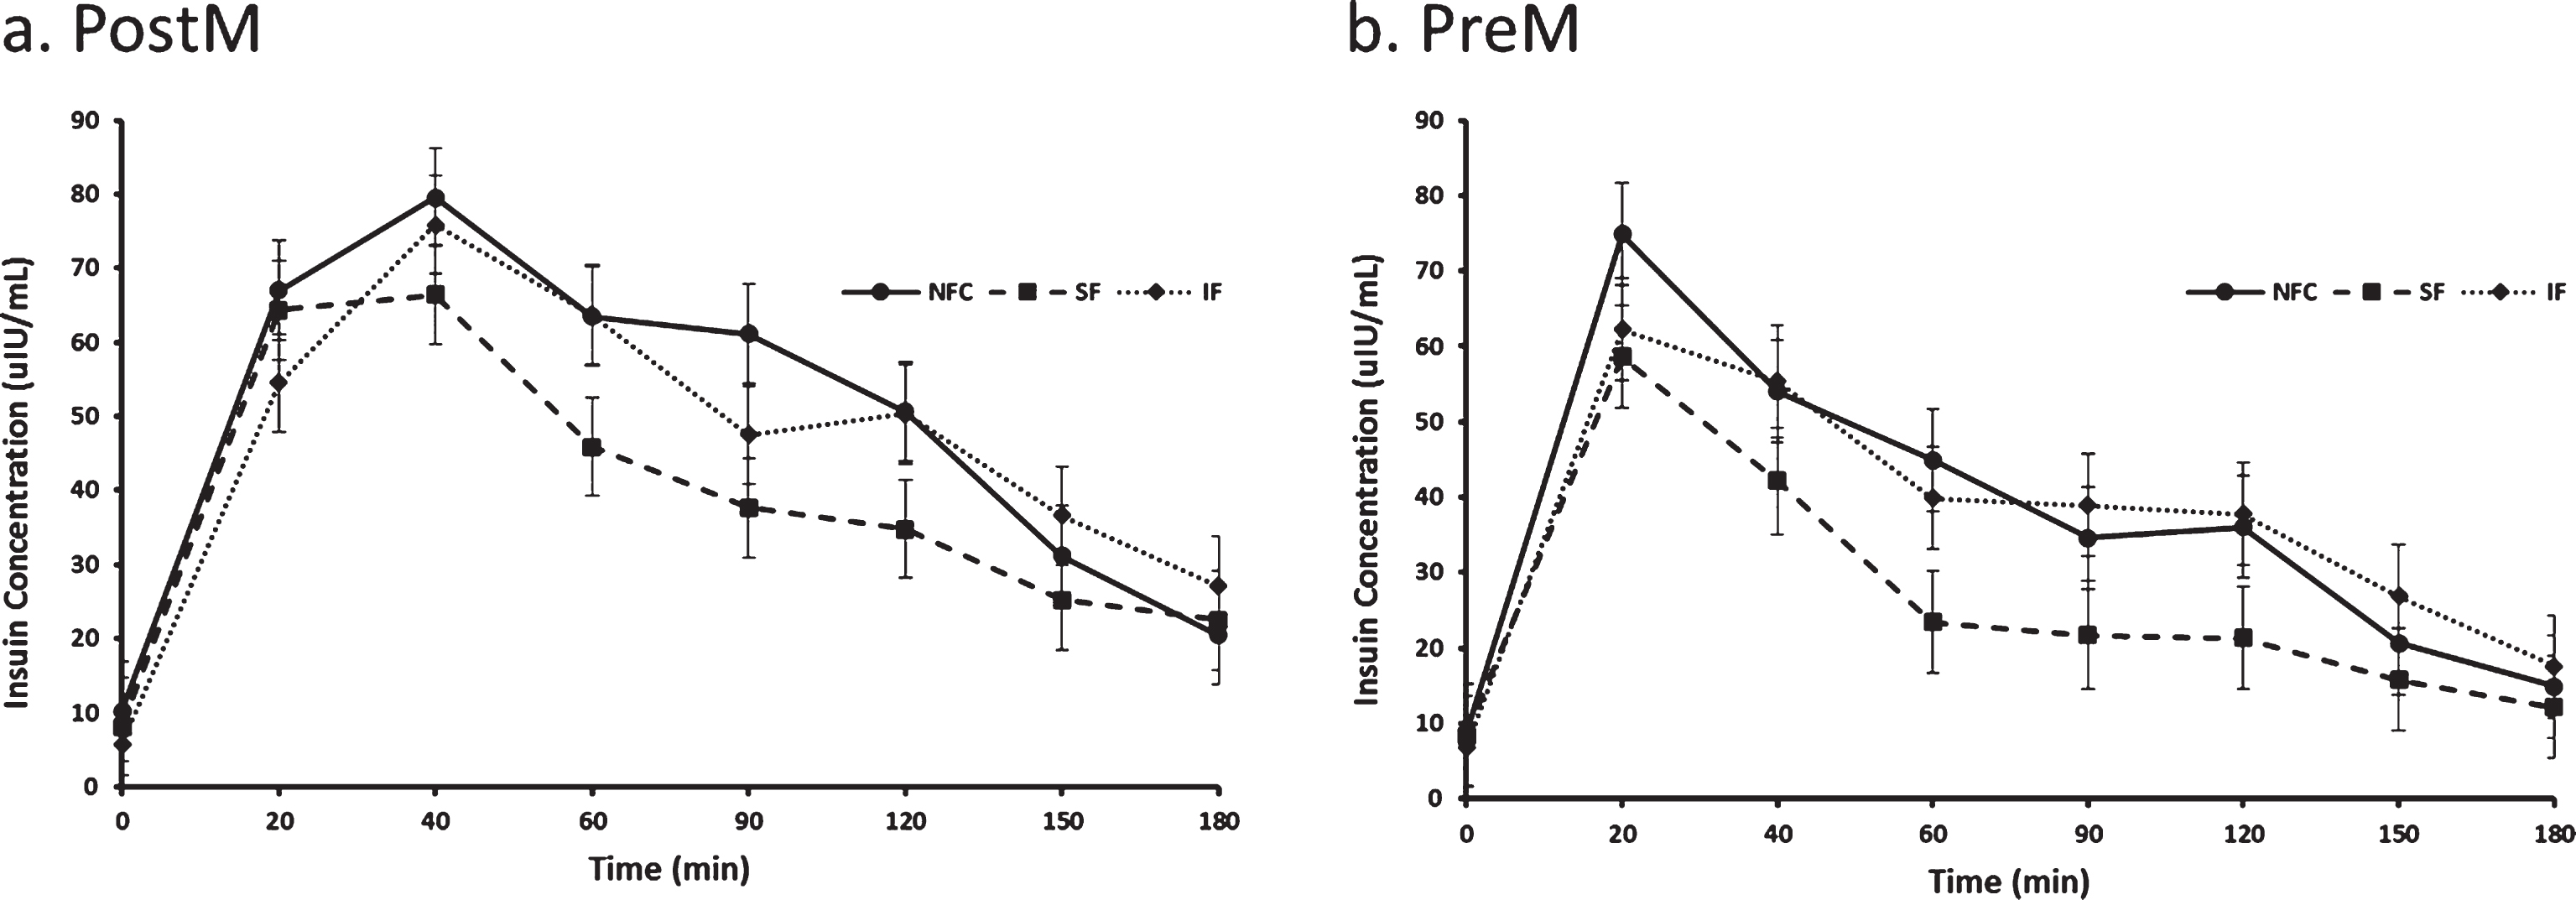 Variation of insulin responses to NFC-No Fiber Control, IF-Insoluble Fiber, SF-Soluble Fiber meals in Postmenopausal (PostM, n = 10) and Premenopausal (PreM, n = 9) women (Figs. 7a and b, respectively). Values are the means±SEM at each time point. Different letters at the same time point denotes significant difference, p < 0.05.